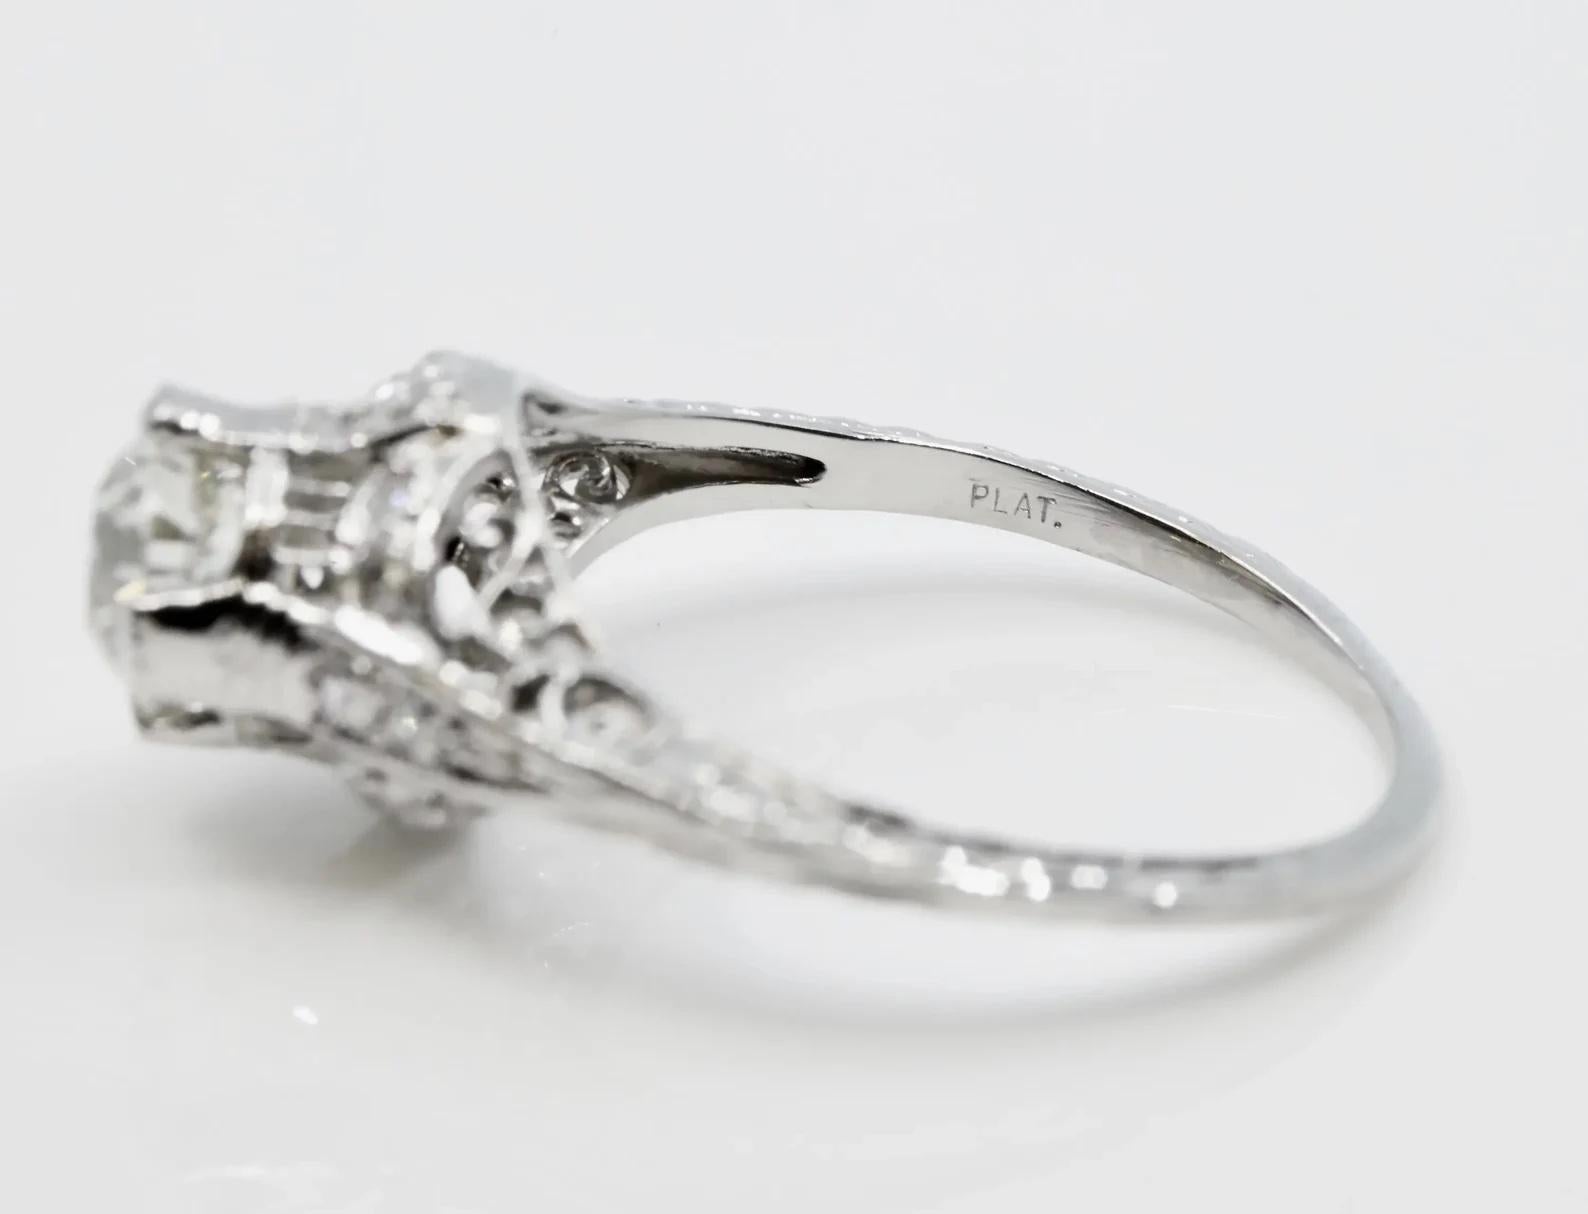 Entrancing Art Deco 0.85ct Diamond Engagement Ring in Platinum In Good Condition For Sale In Boston, MA